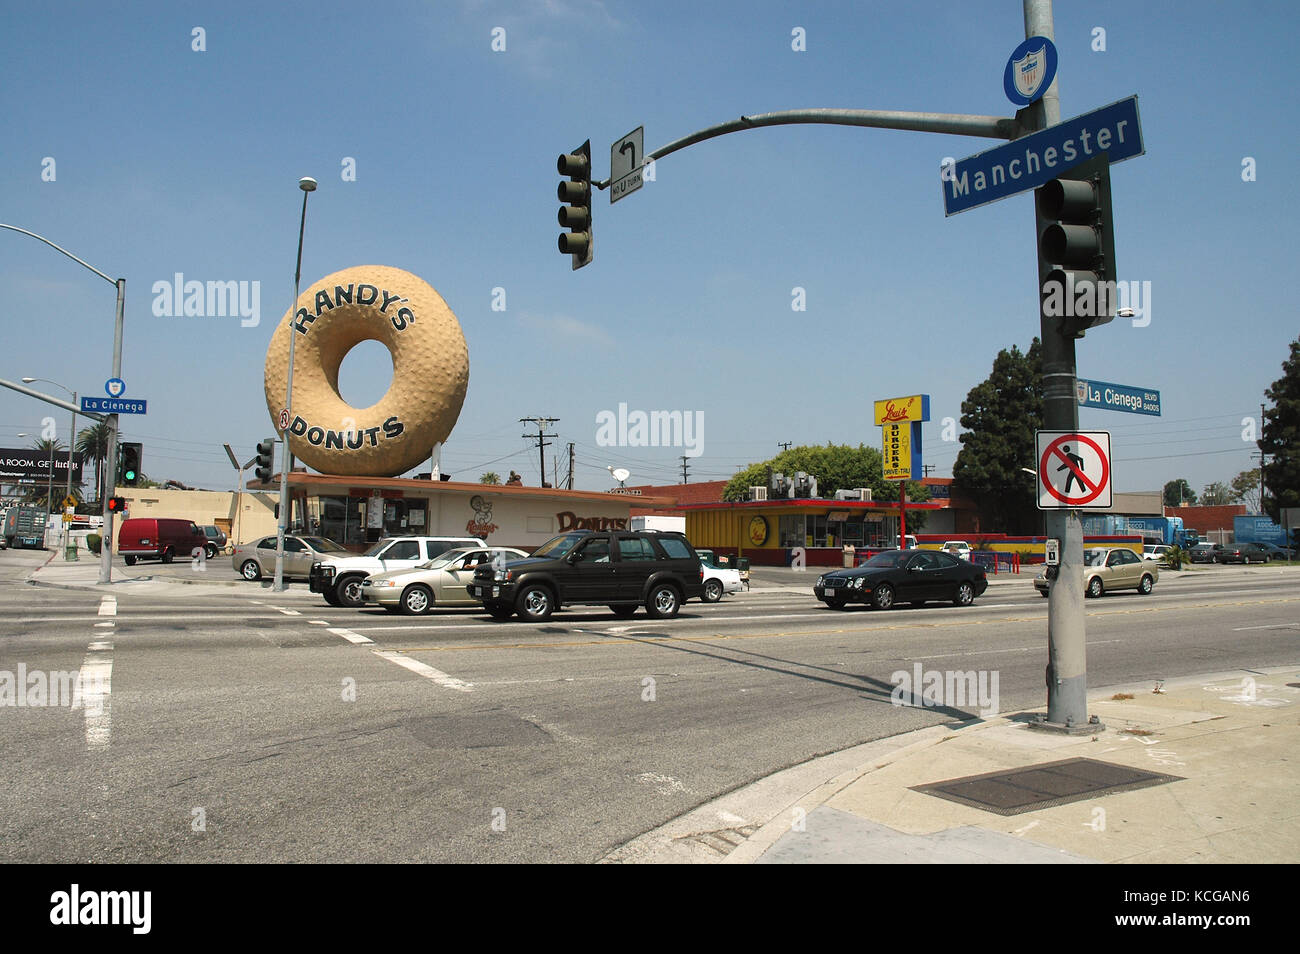 Randys Donuts with a giant donut on top in Inglewood, California, USA Stock Photo